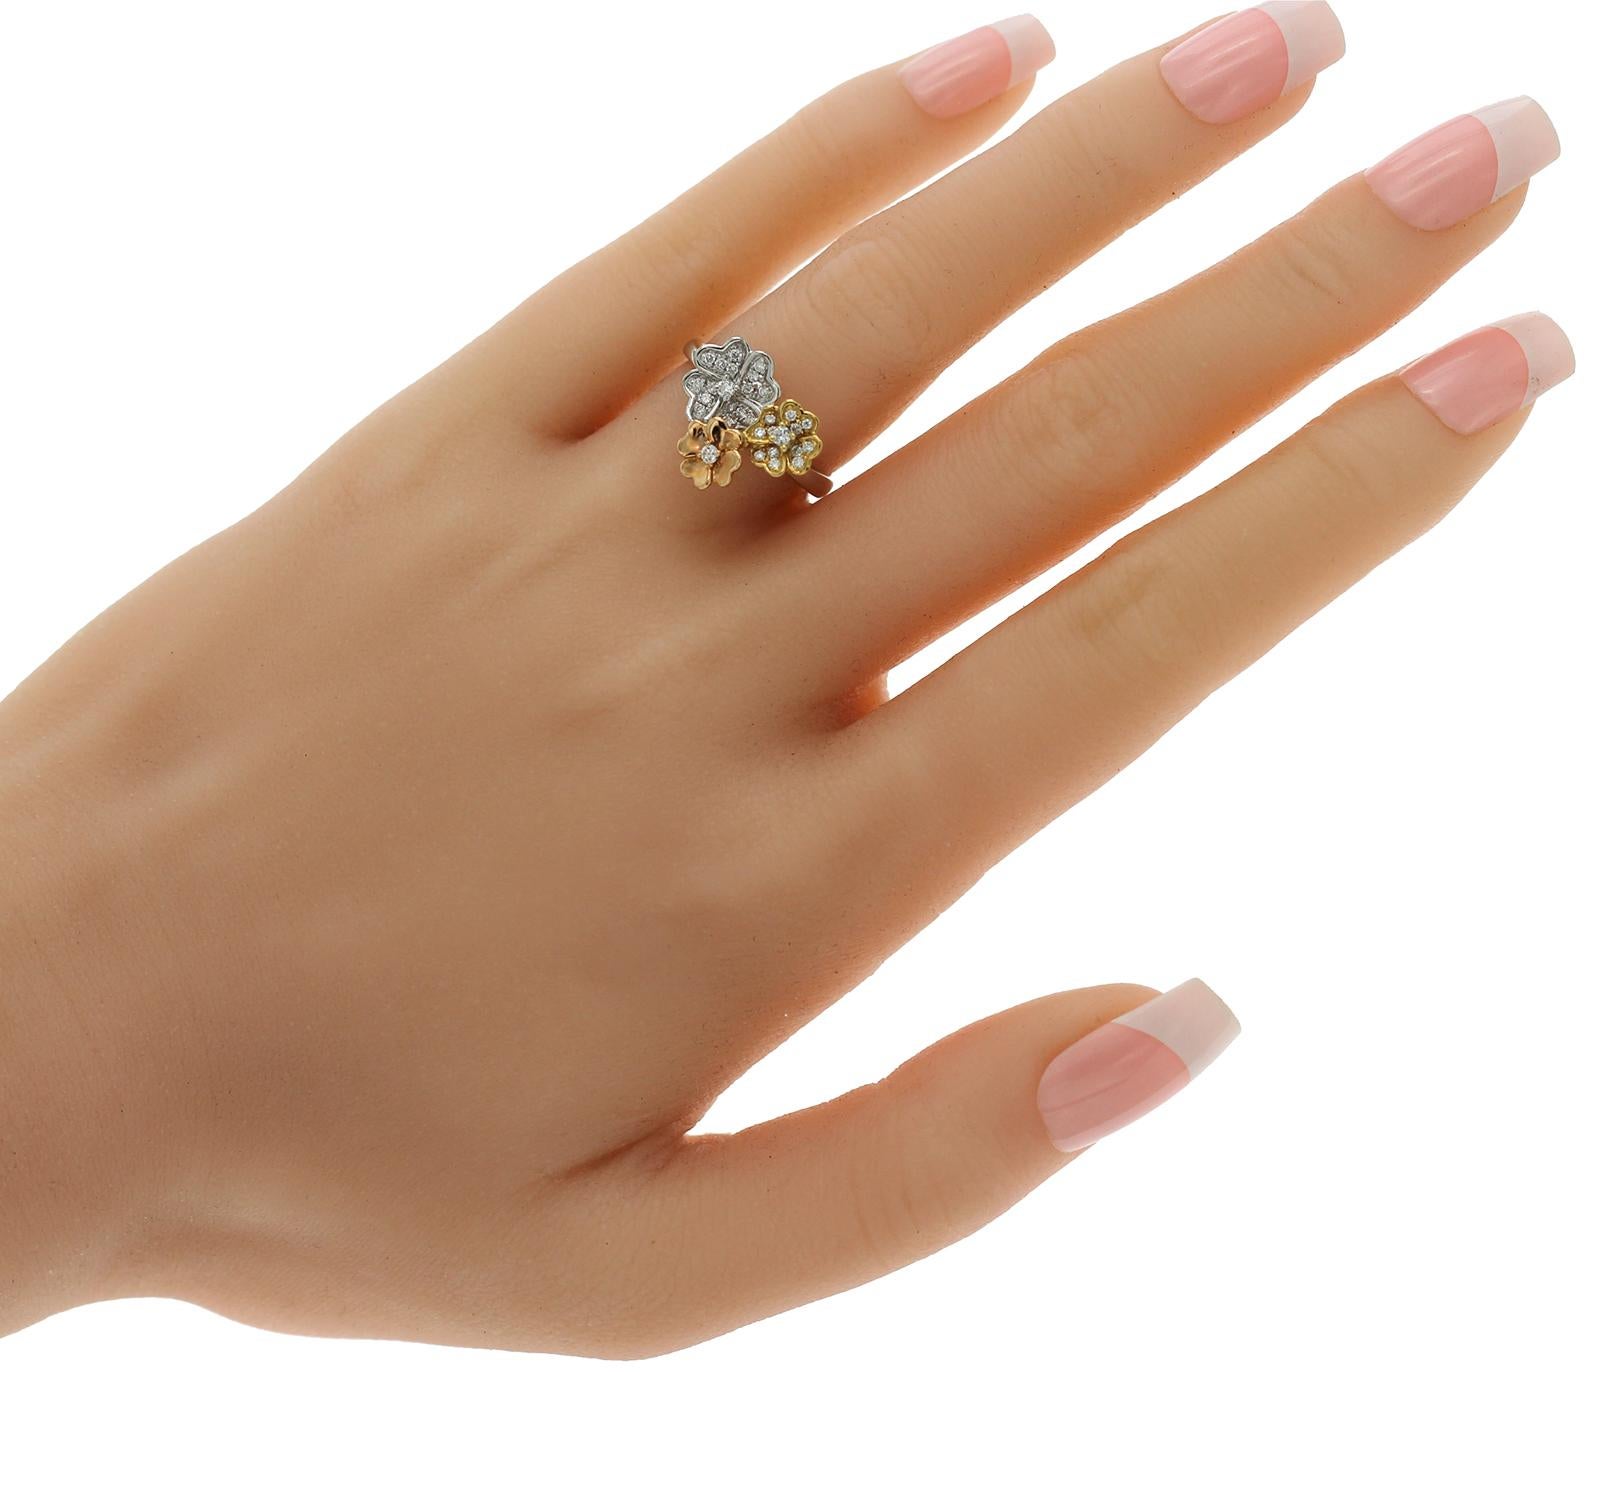 12.7 mm ring size